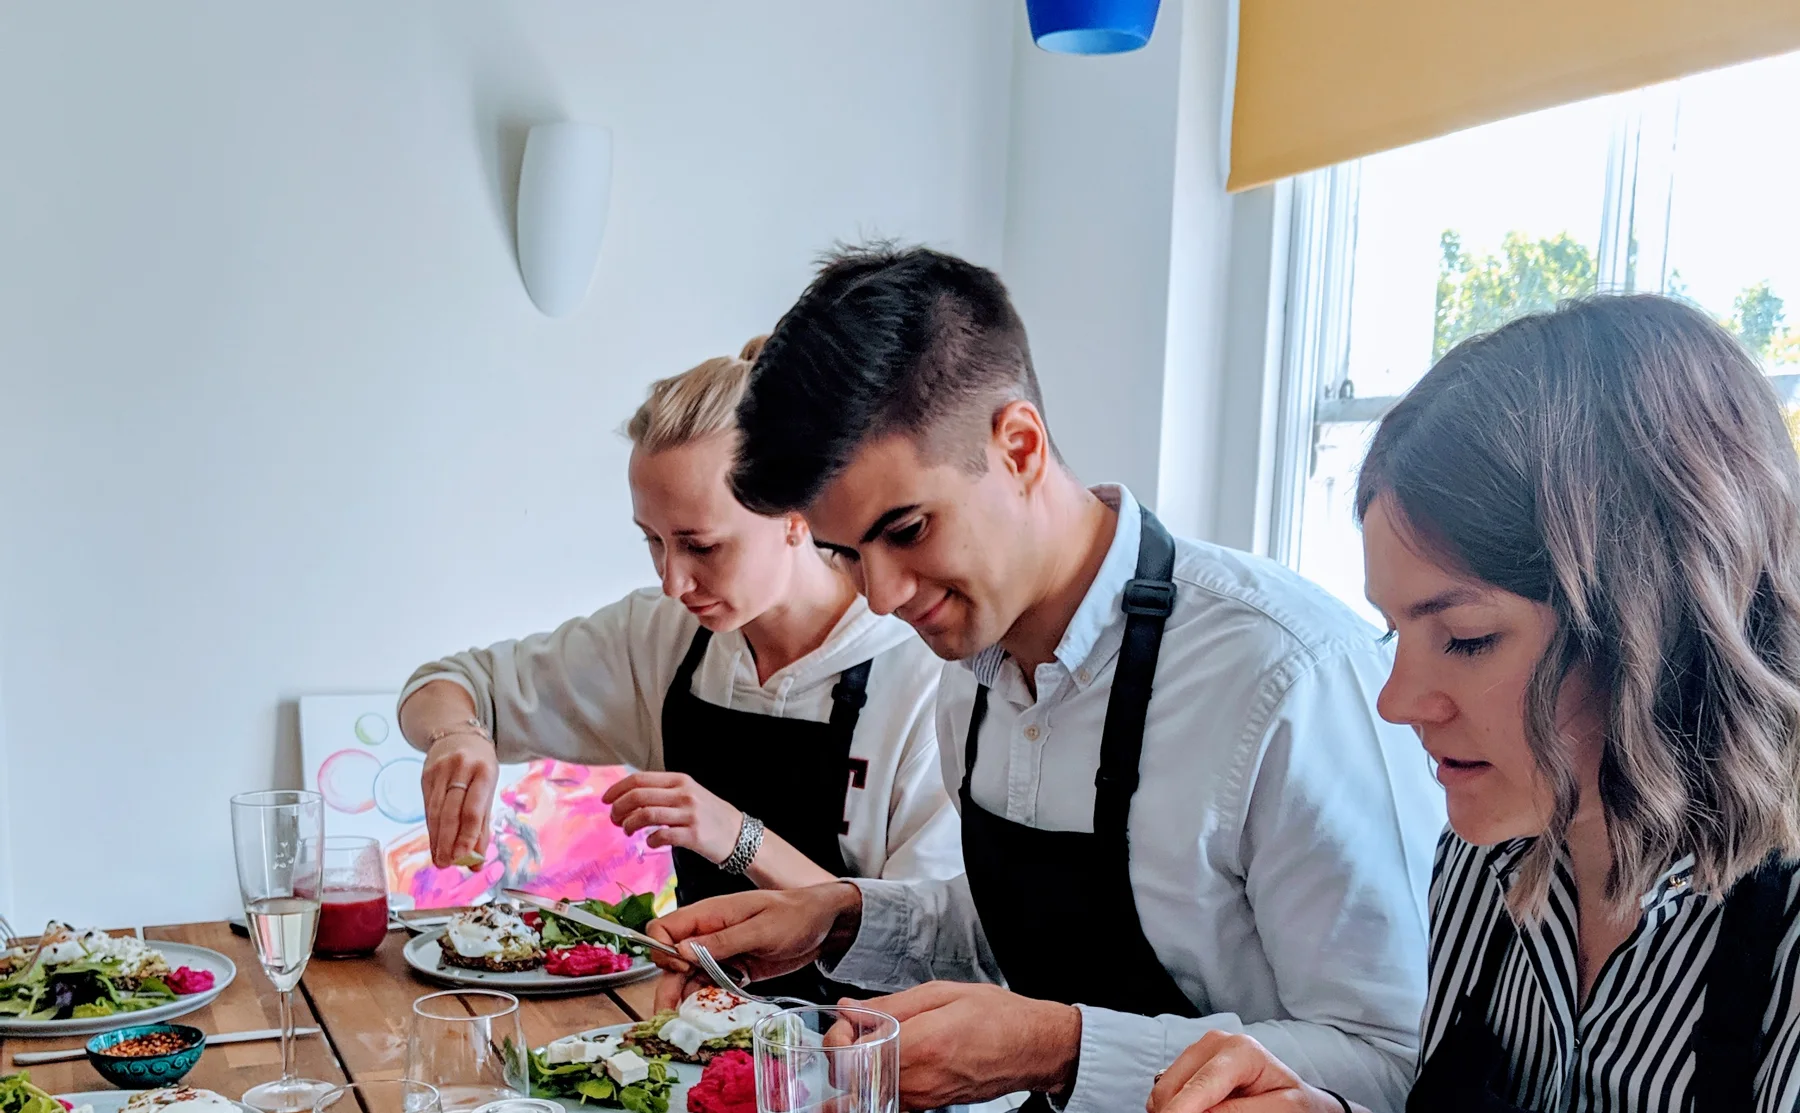 Bottomless brunch cooking class in London - 1296235